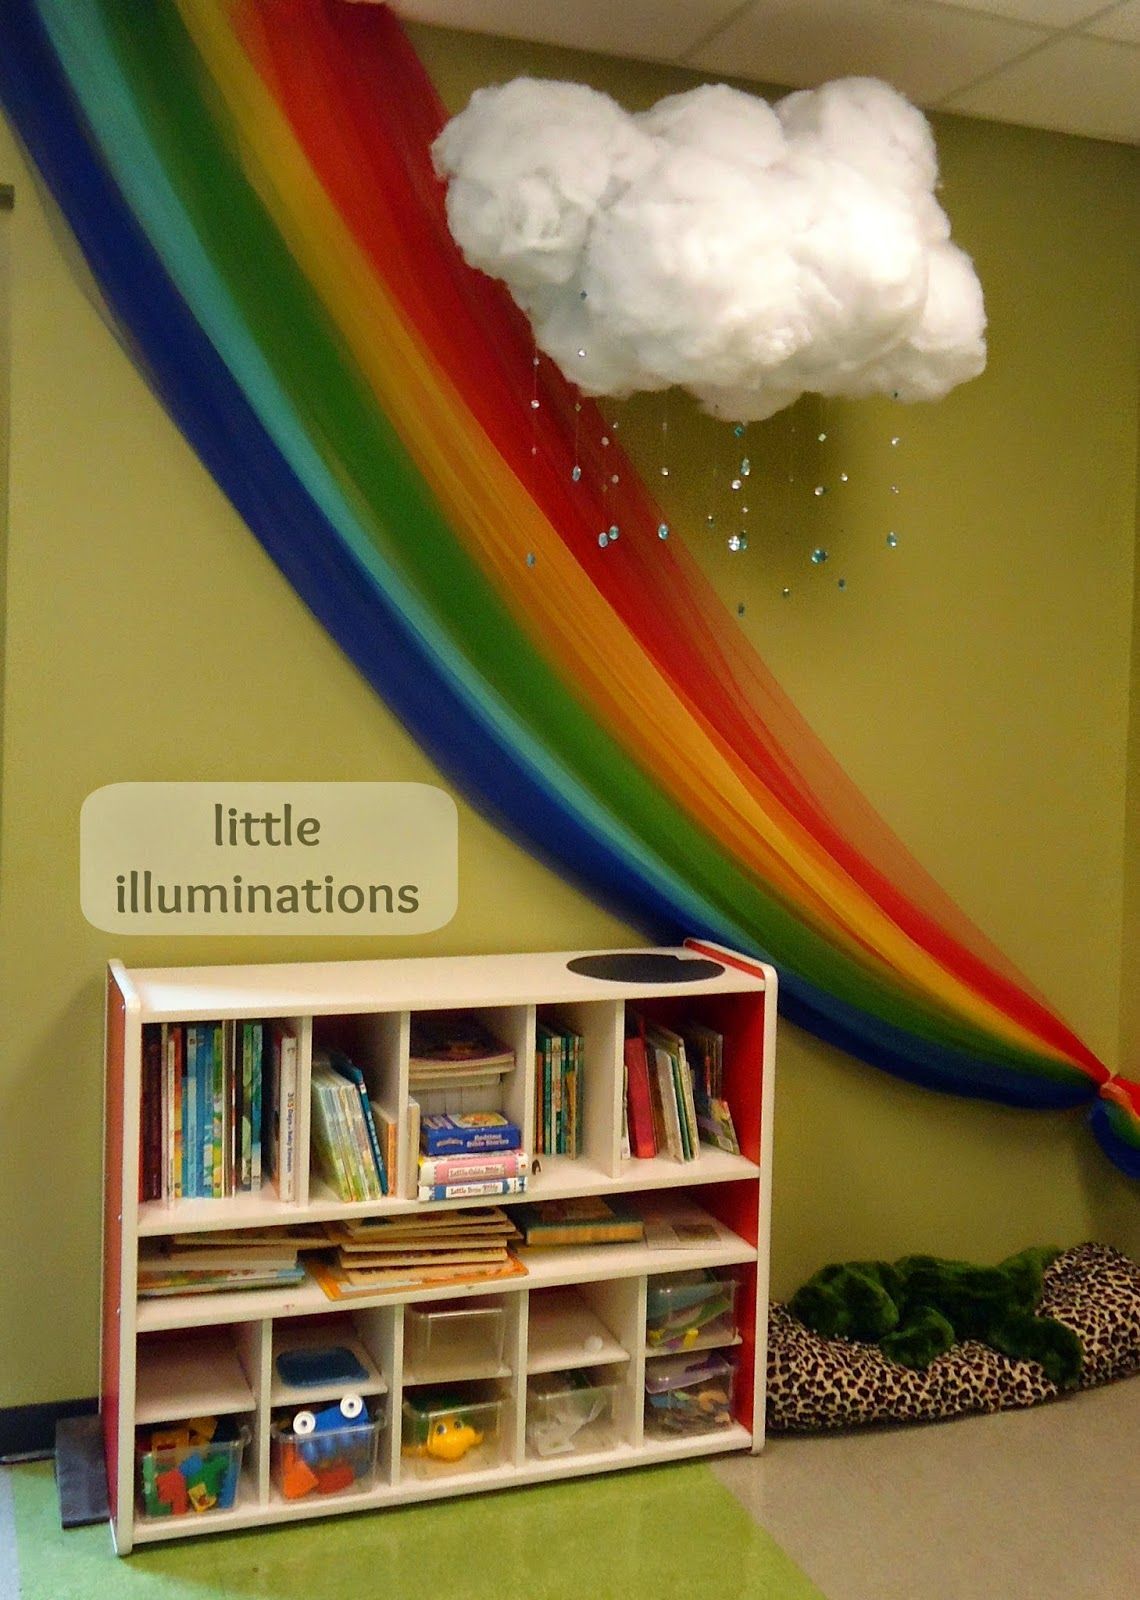 14 “Must-See” Sunday School Bulletin Boards, Doors and More!